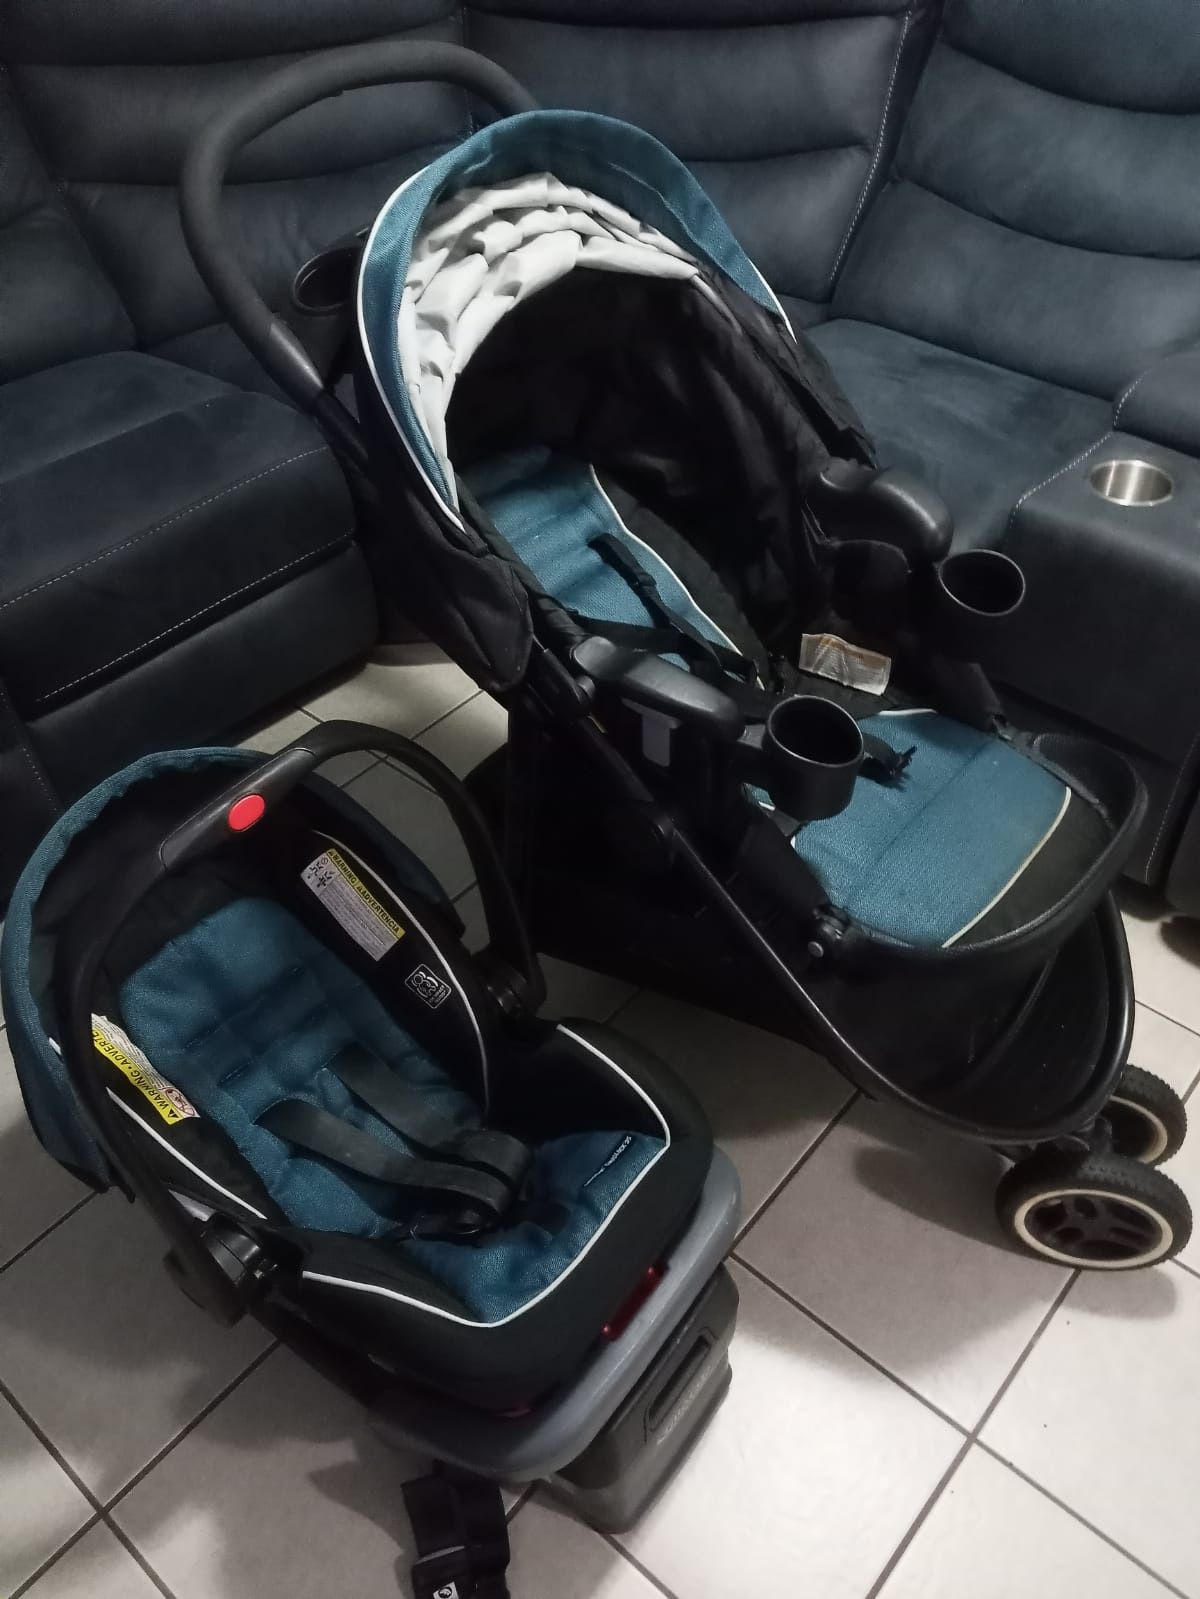 Graco Stroller ready for a new home